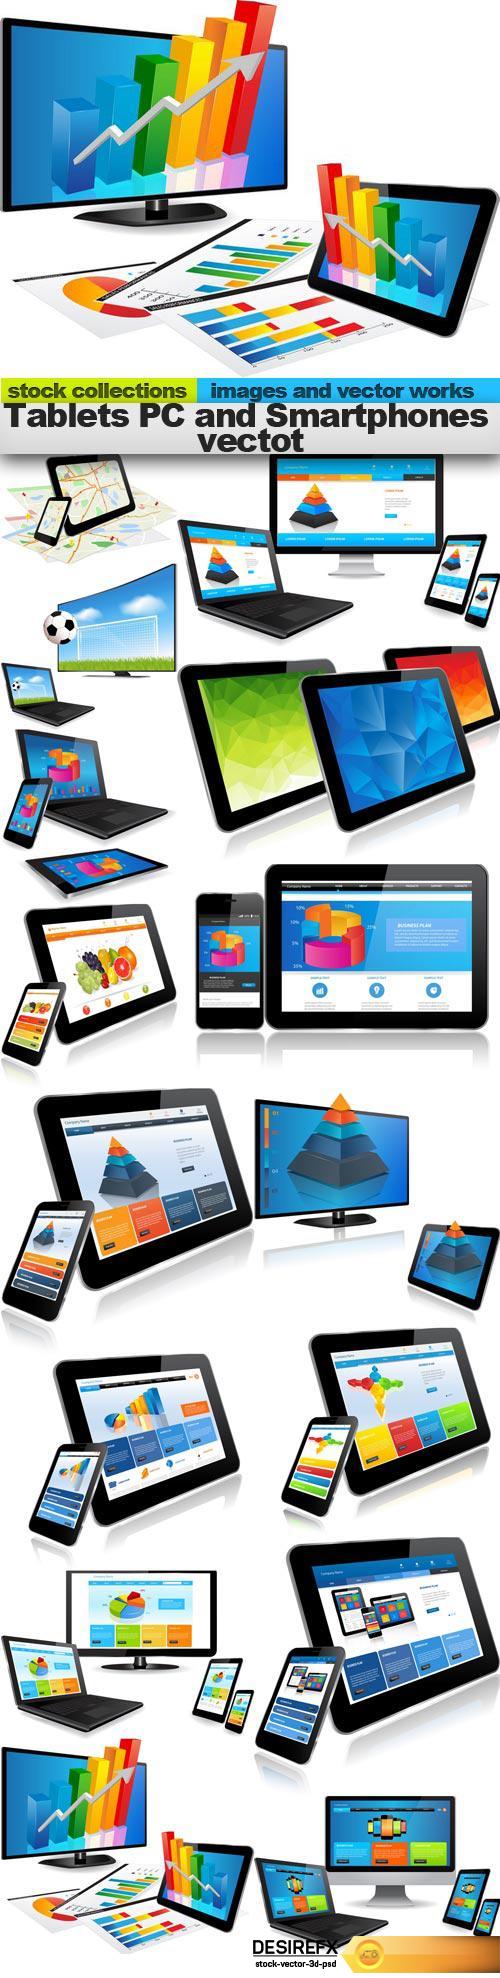 Tablets PC and Smartphones vectot, 15 x EPS